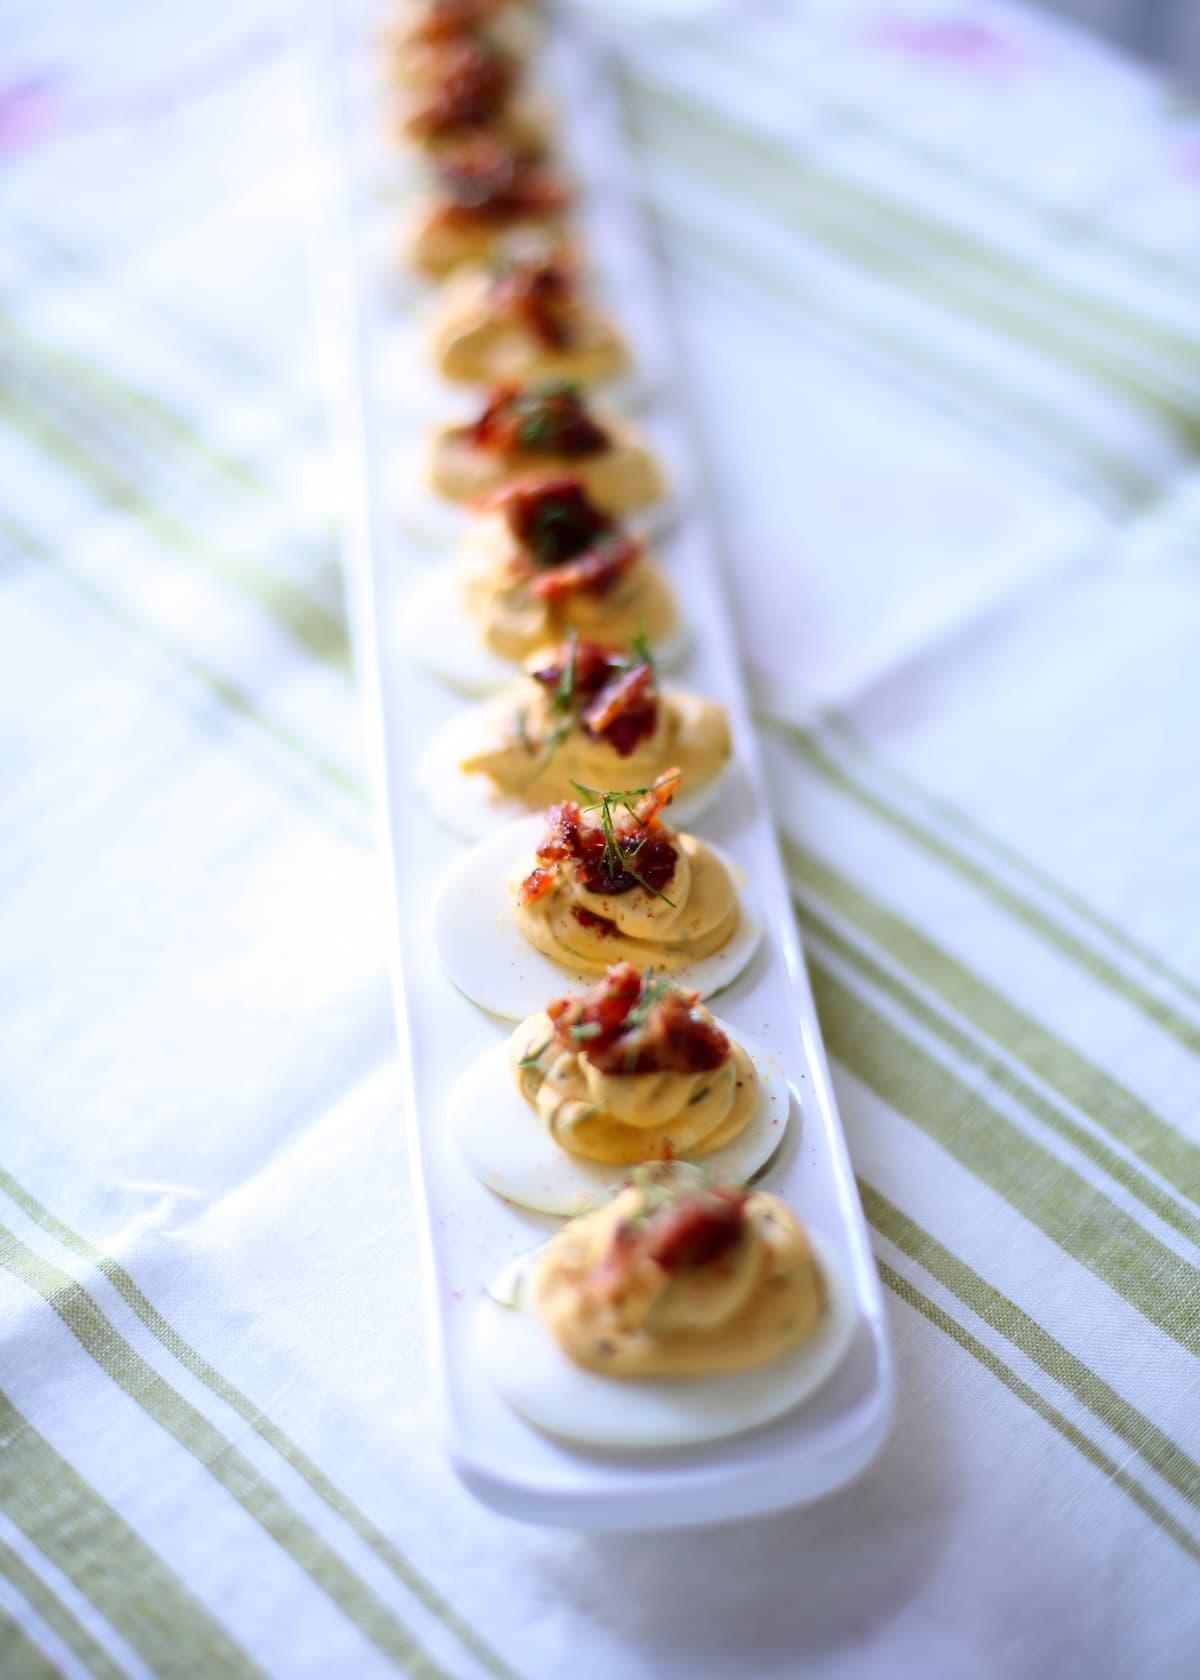 a vertical photo of deviled eggs on a table with striped tablecloth.